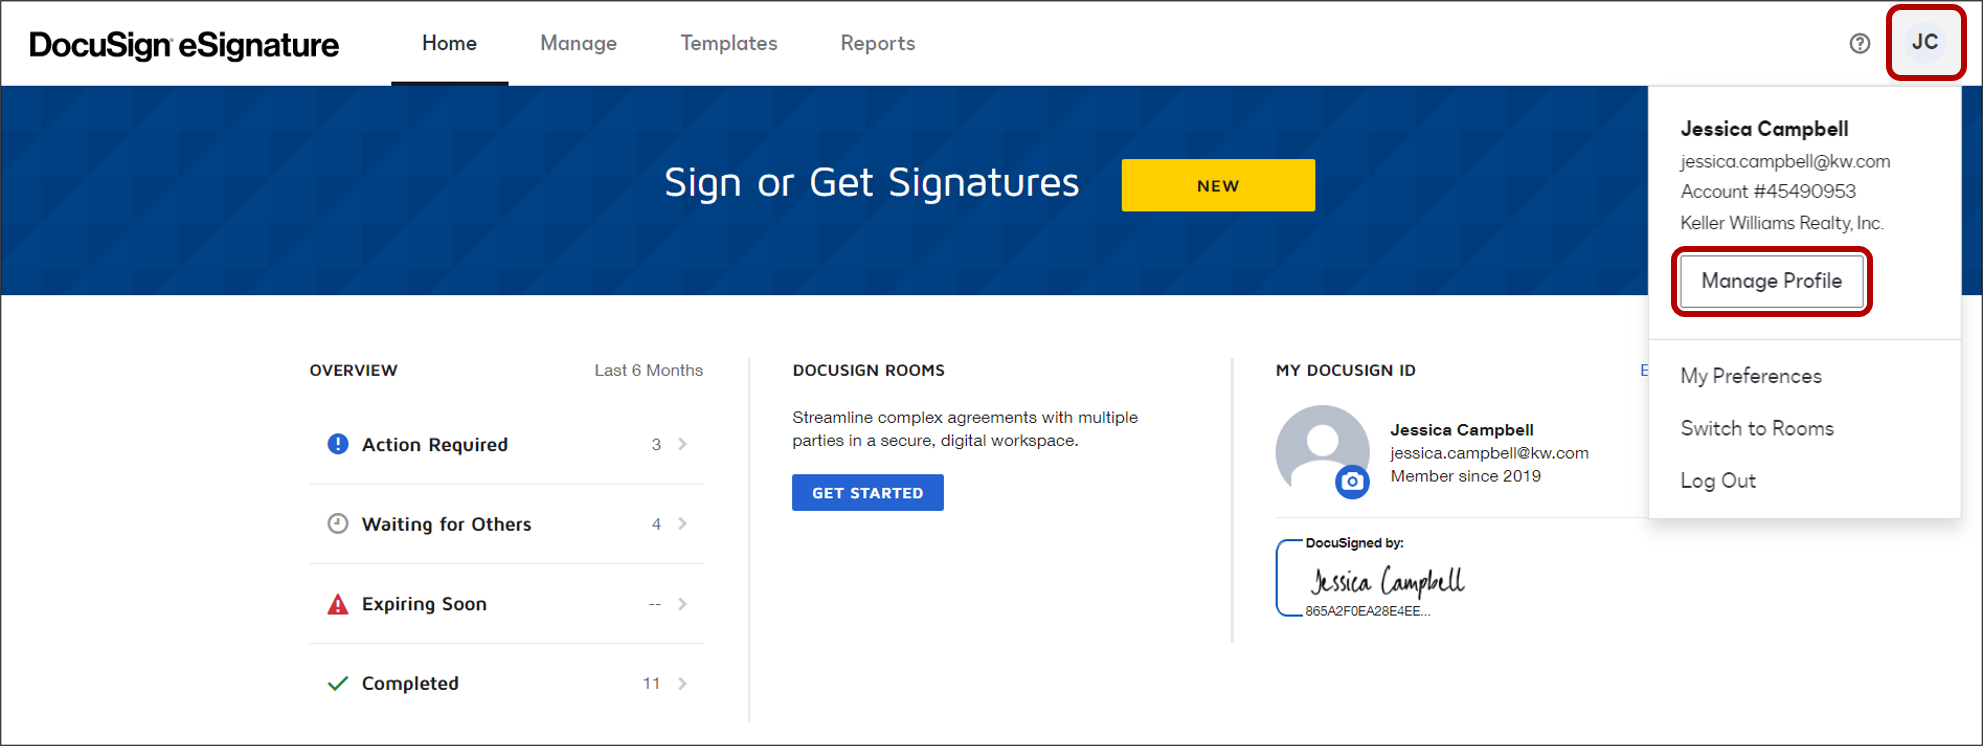 docusign_manage_profile.png